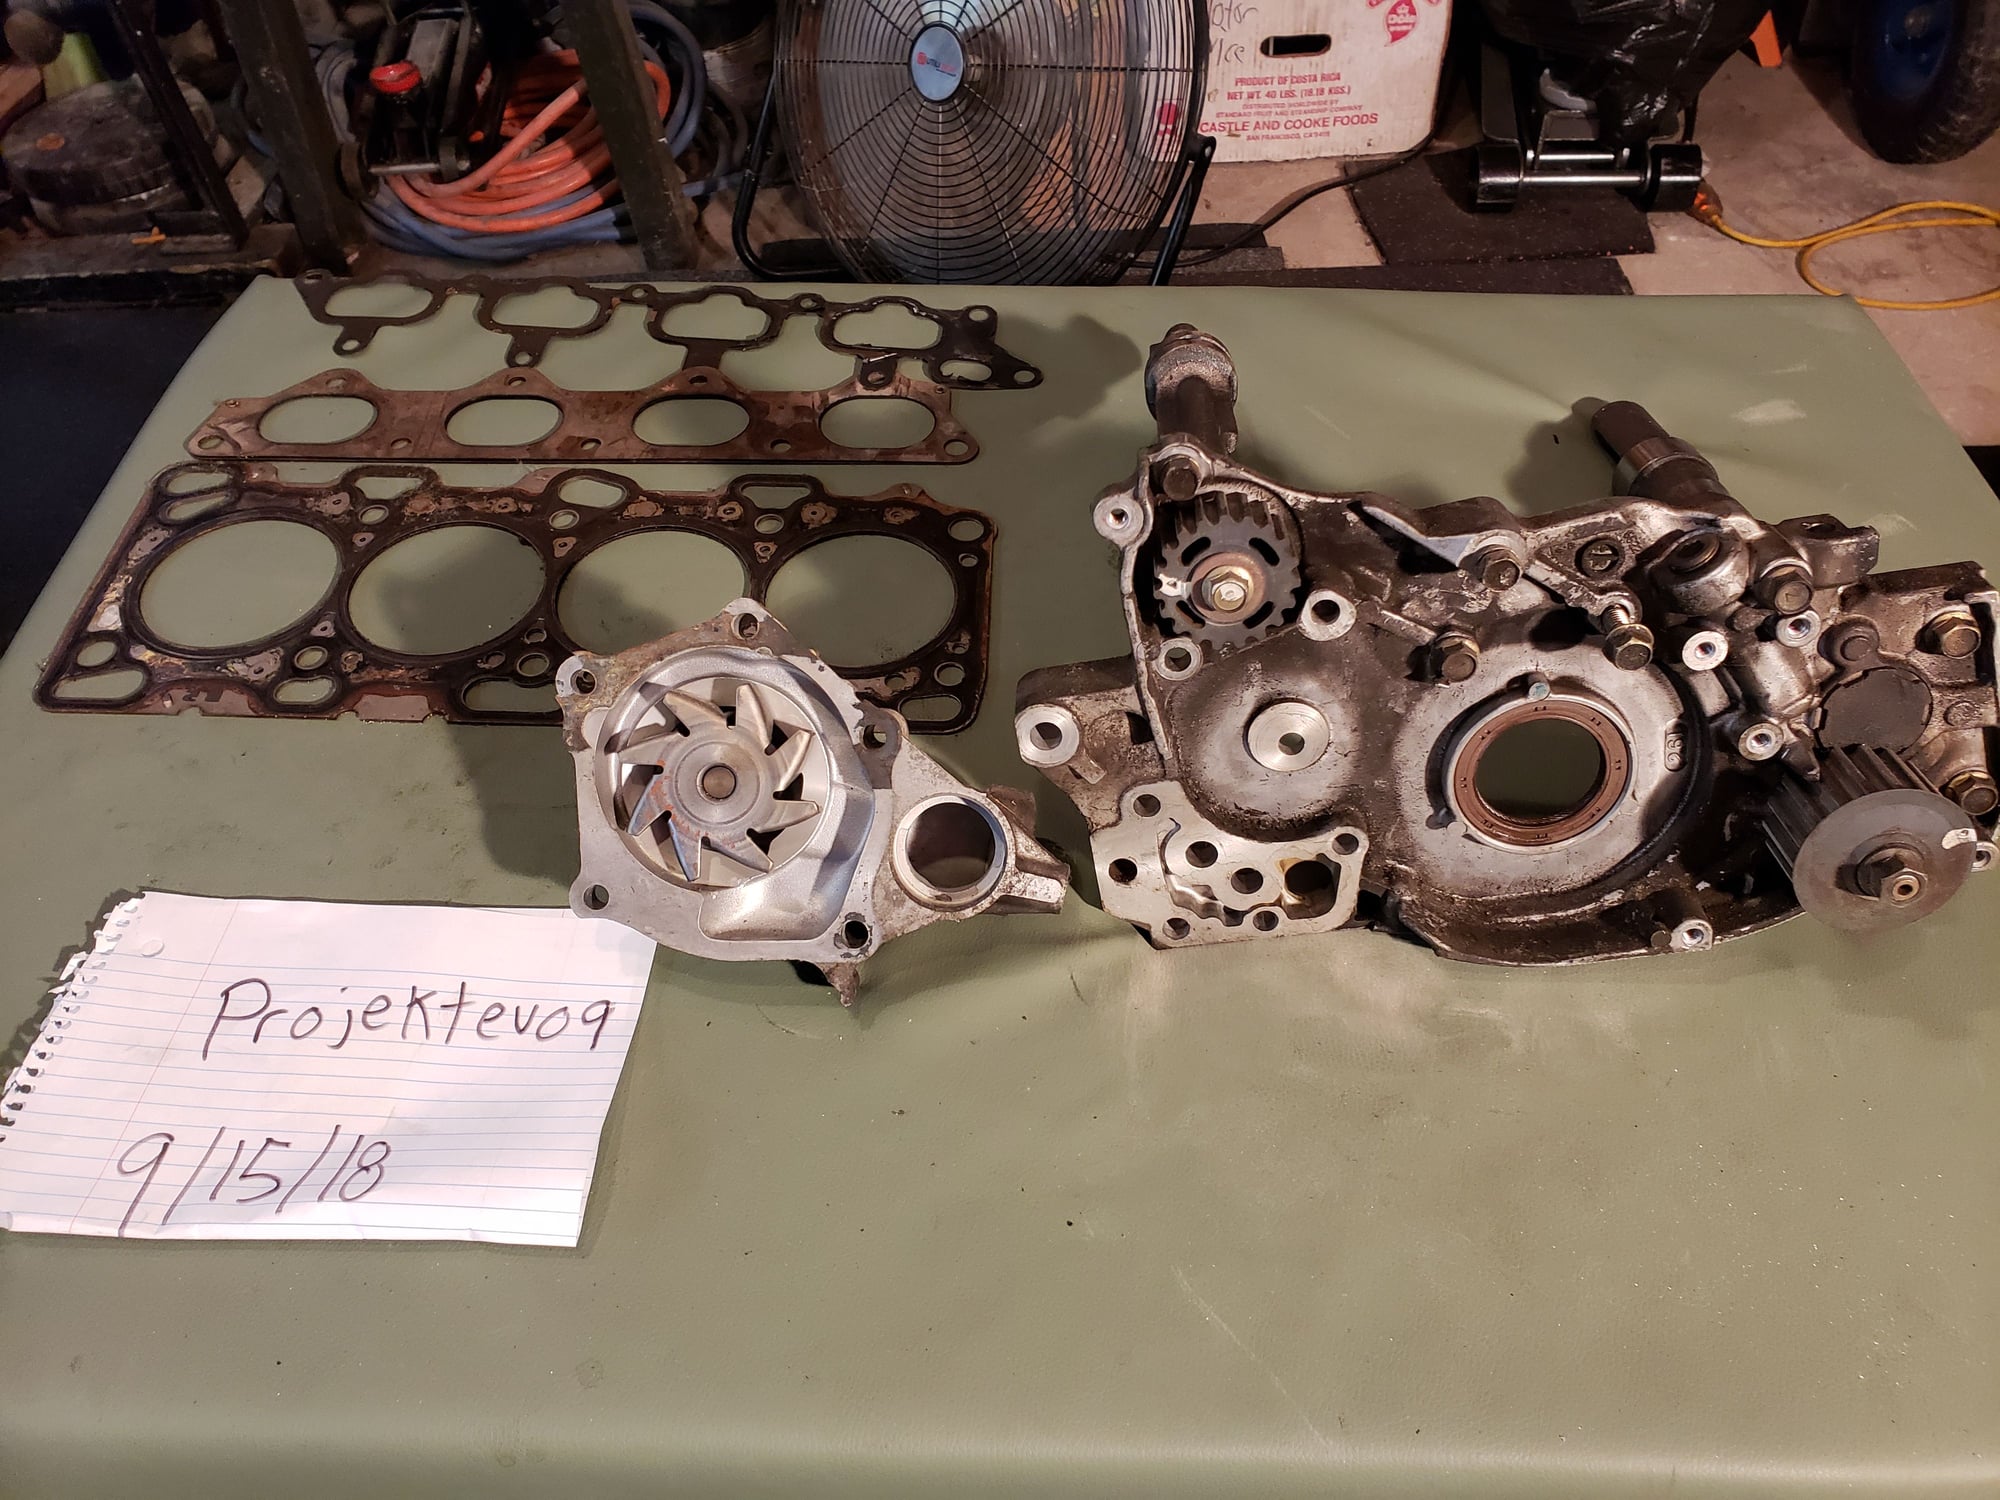 2003 Mitsubishi Lancer Evolution - Front Case/Water Pump/Gaskets - Miscellaneous - $1 - Altoona, PA 16602, United States